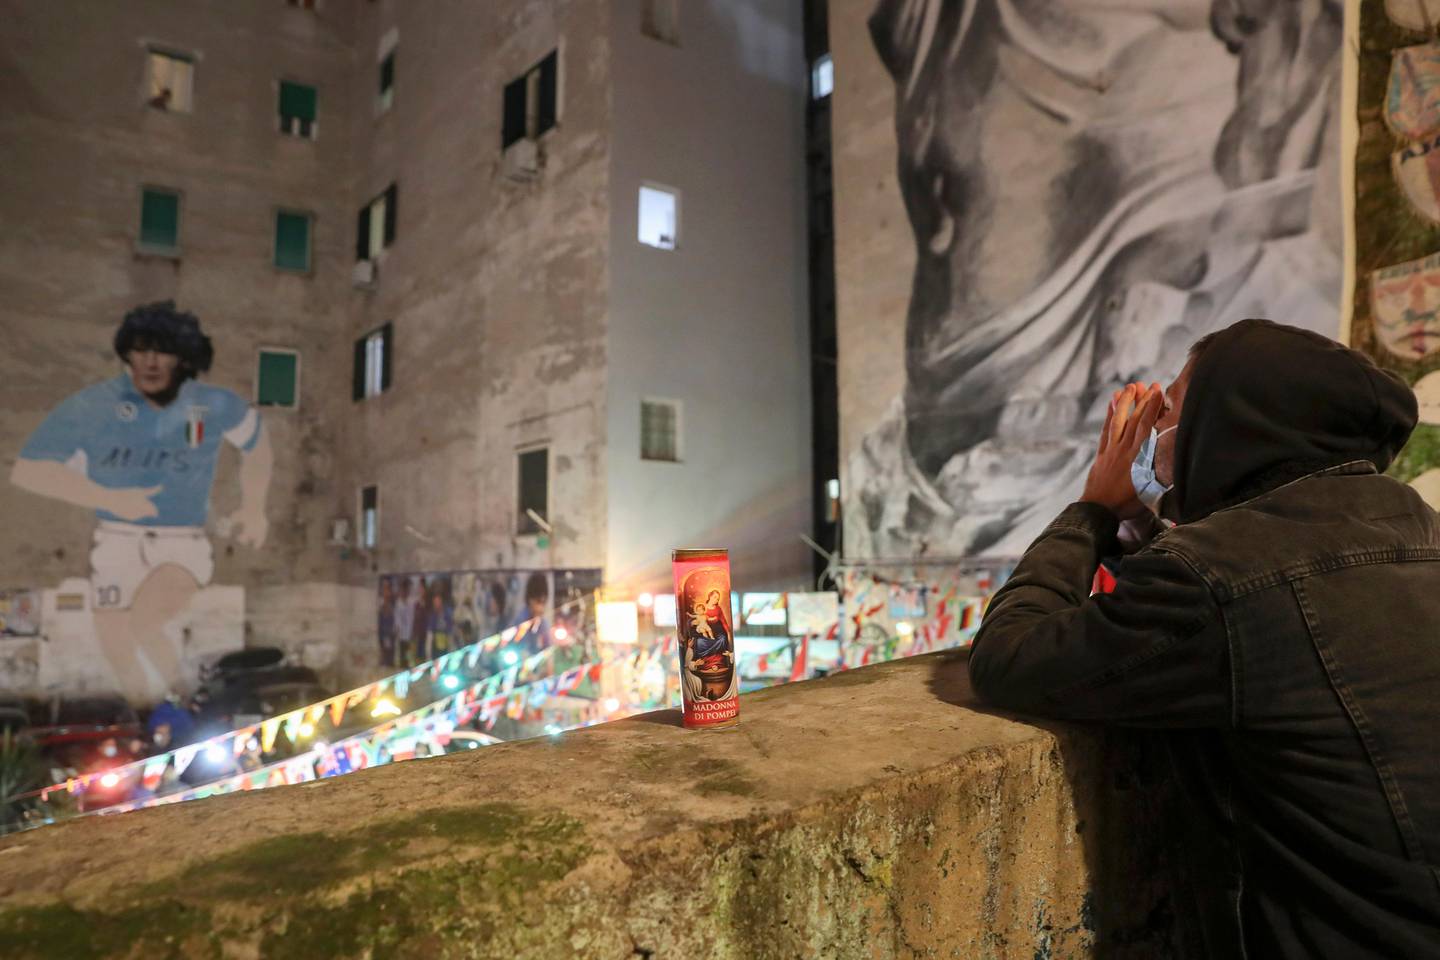 A man prays under a mural depicting soccer legend Diego Maradona, in Naples, Italy, Wednesday, Nov. 25, 2020. Diego Maradona has died. The Argentine soccer great was among the best players ever and who led his country to the 1986 World Cup title before later struggling with cocaine use and obesity. He was 60. (AP Photo/Salvatore Laporta)